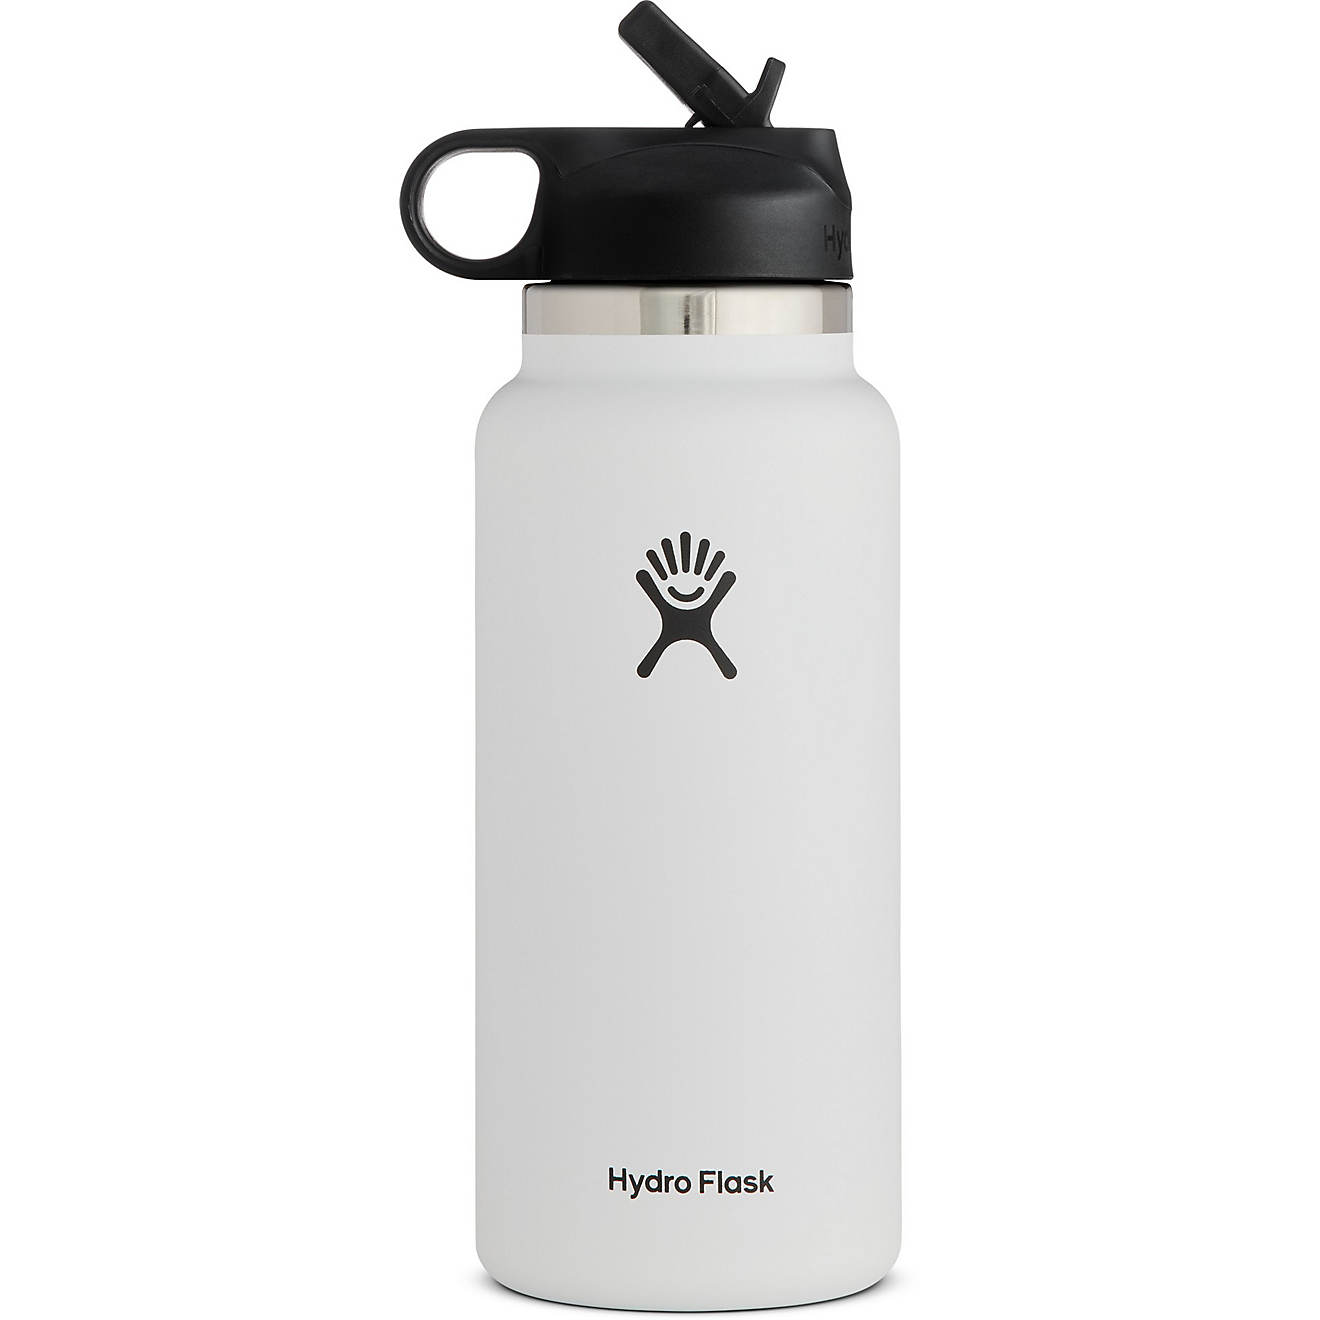 Hydro Flask 32 oz Wide Mouth Bottle 2.0 with Straw Lid